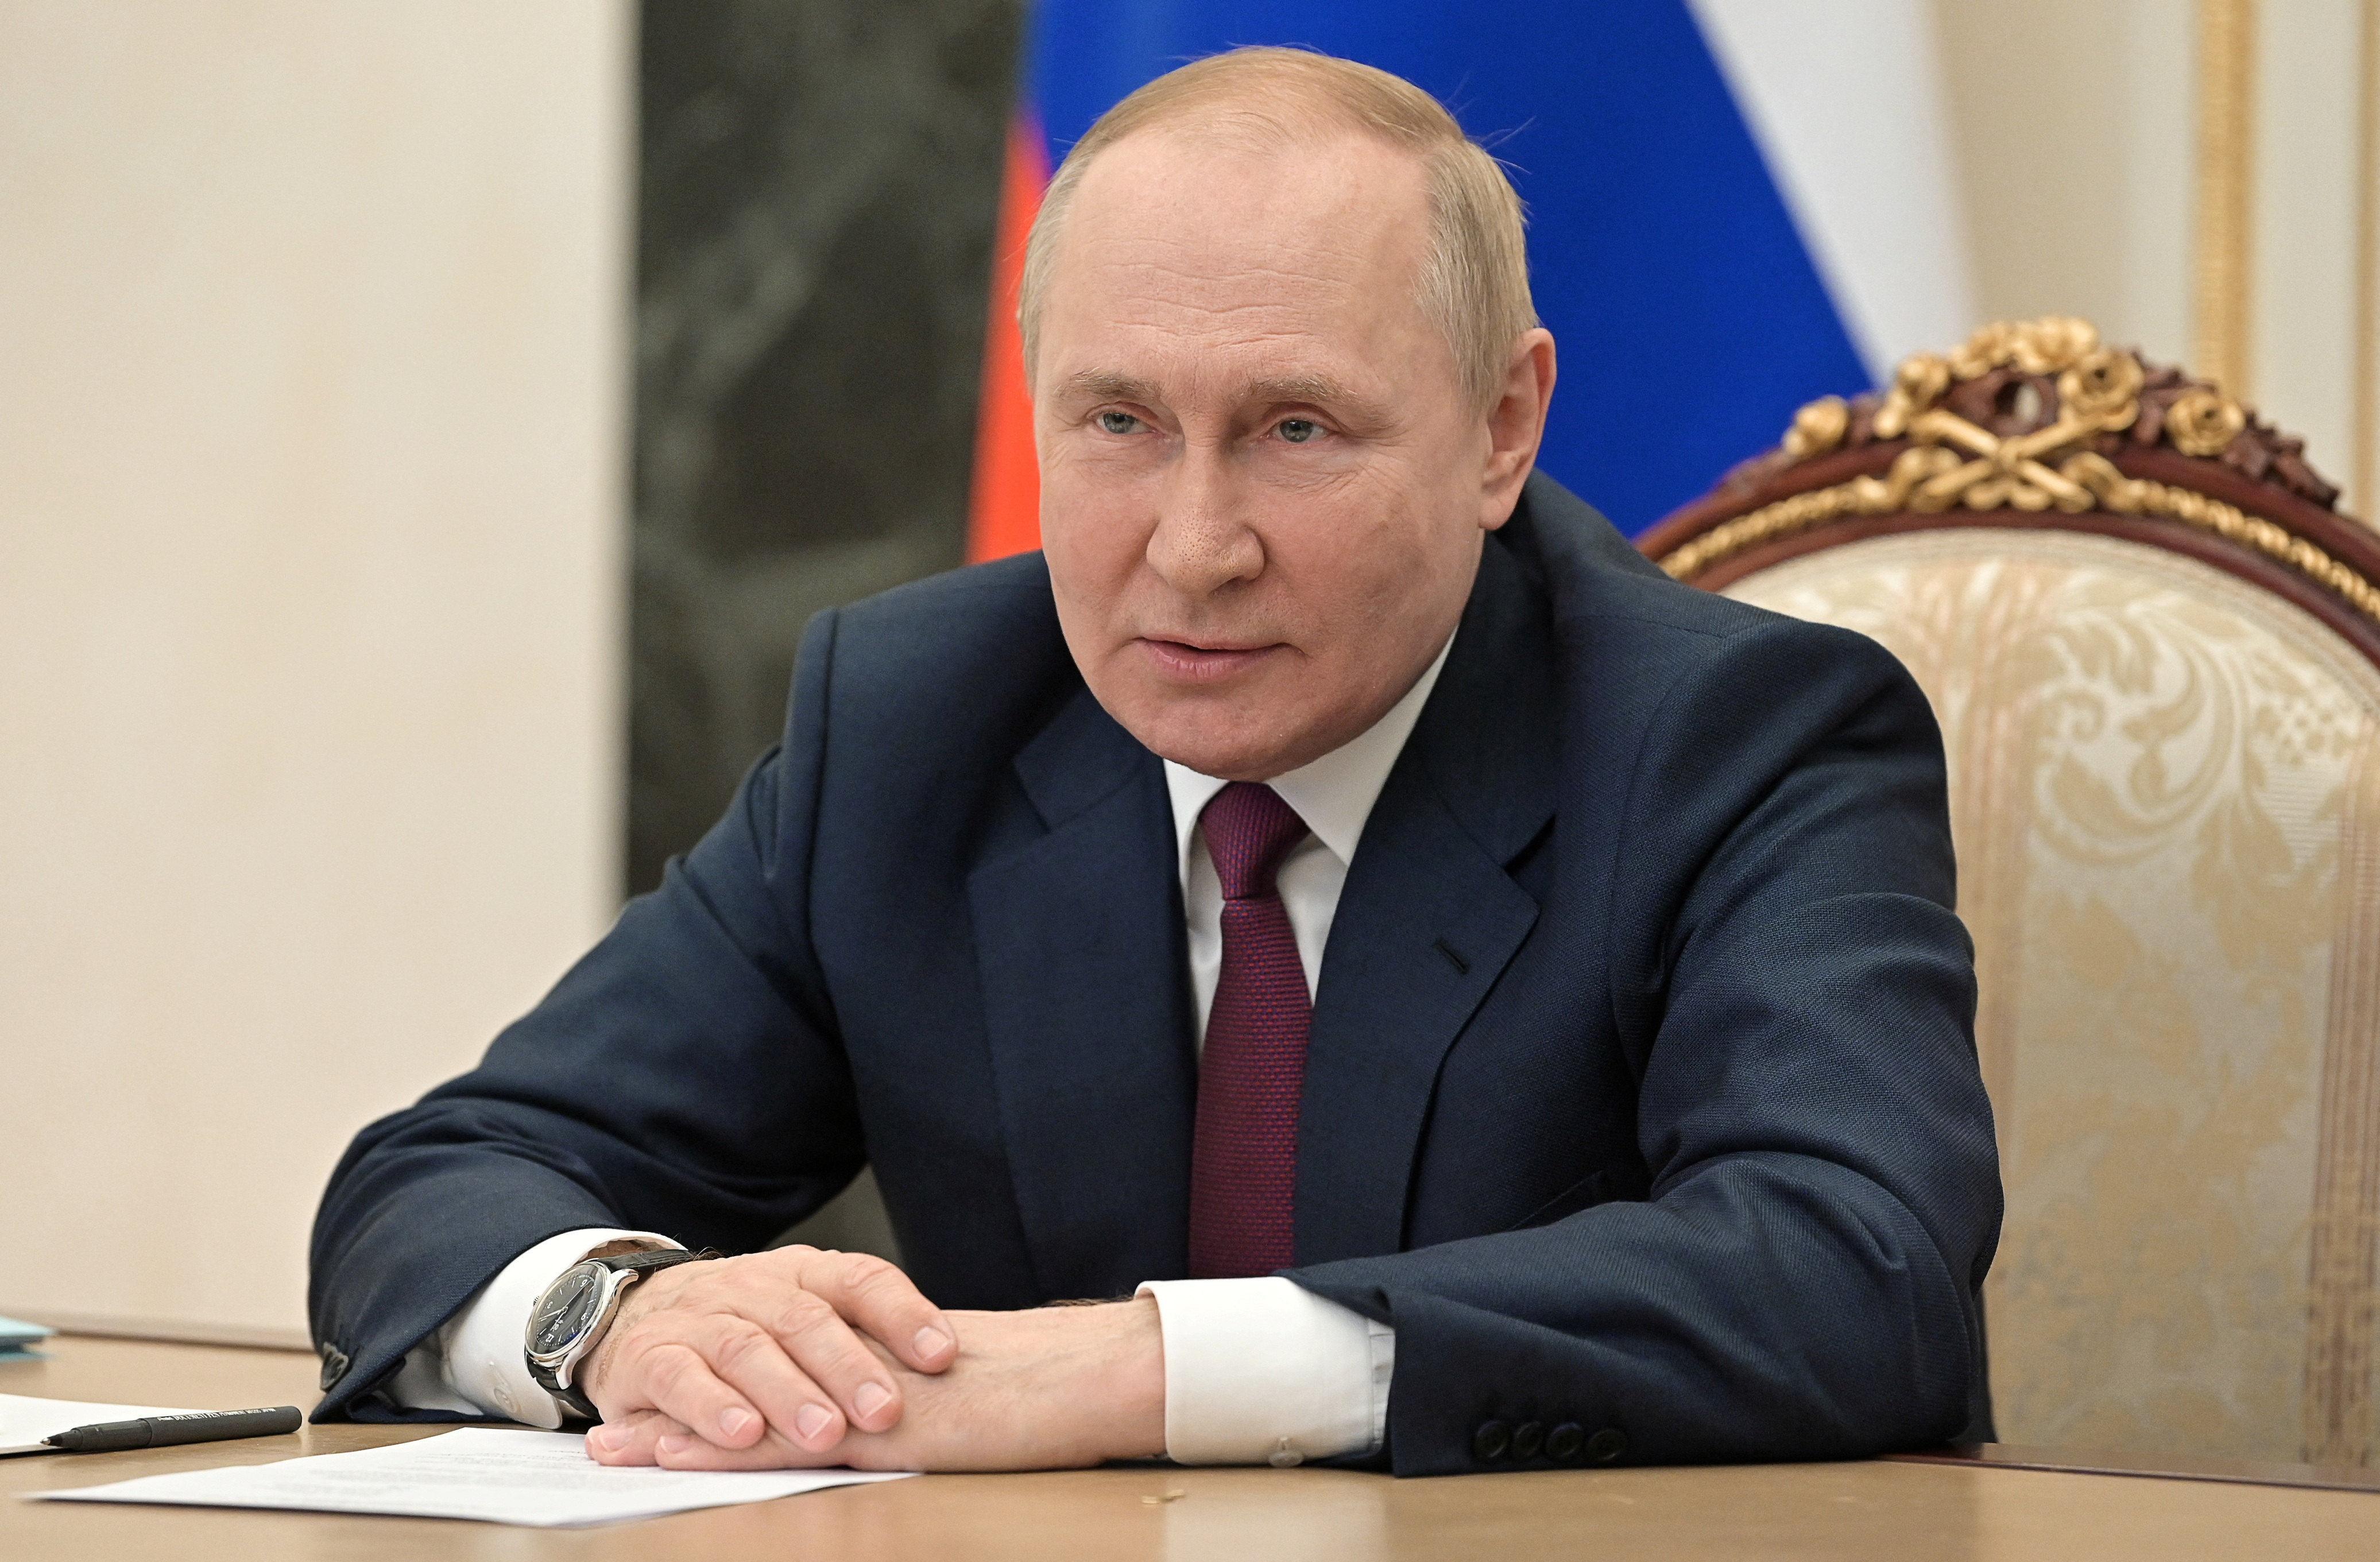 Russian President Vladimir Putin attends a meeting with participants of the Bolshaya Peremena national contest for school students, via video link in Moscow